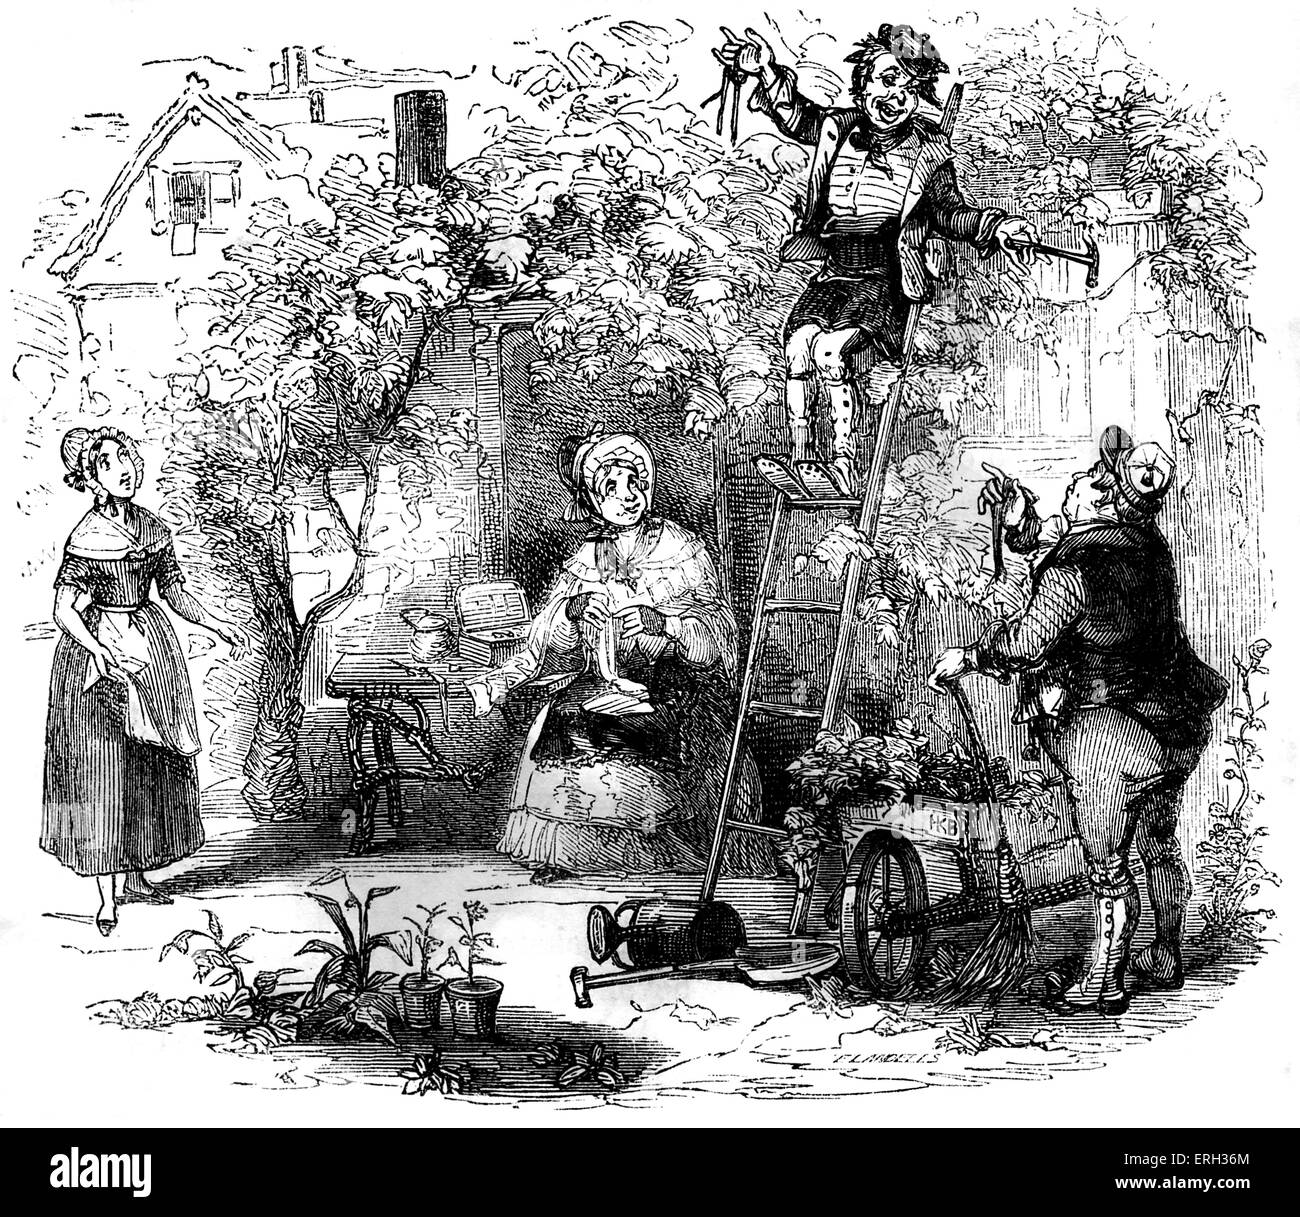 Charles Dickens 's 'The Old Curiosity Shop'. First published 1841. Description of scene: Mr Garland and Kit work in the garden. Chapter Forty. Illustration by Hablot K Browne - 'Phiz' (1815-1882). CD: English novelist 7 February 1812 – 9 June 1870 Stock Photo